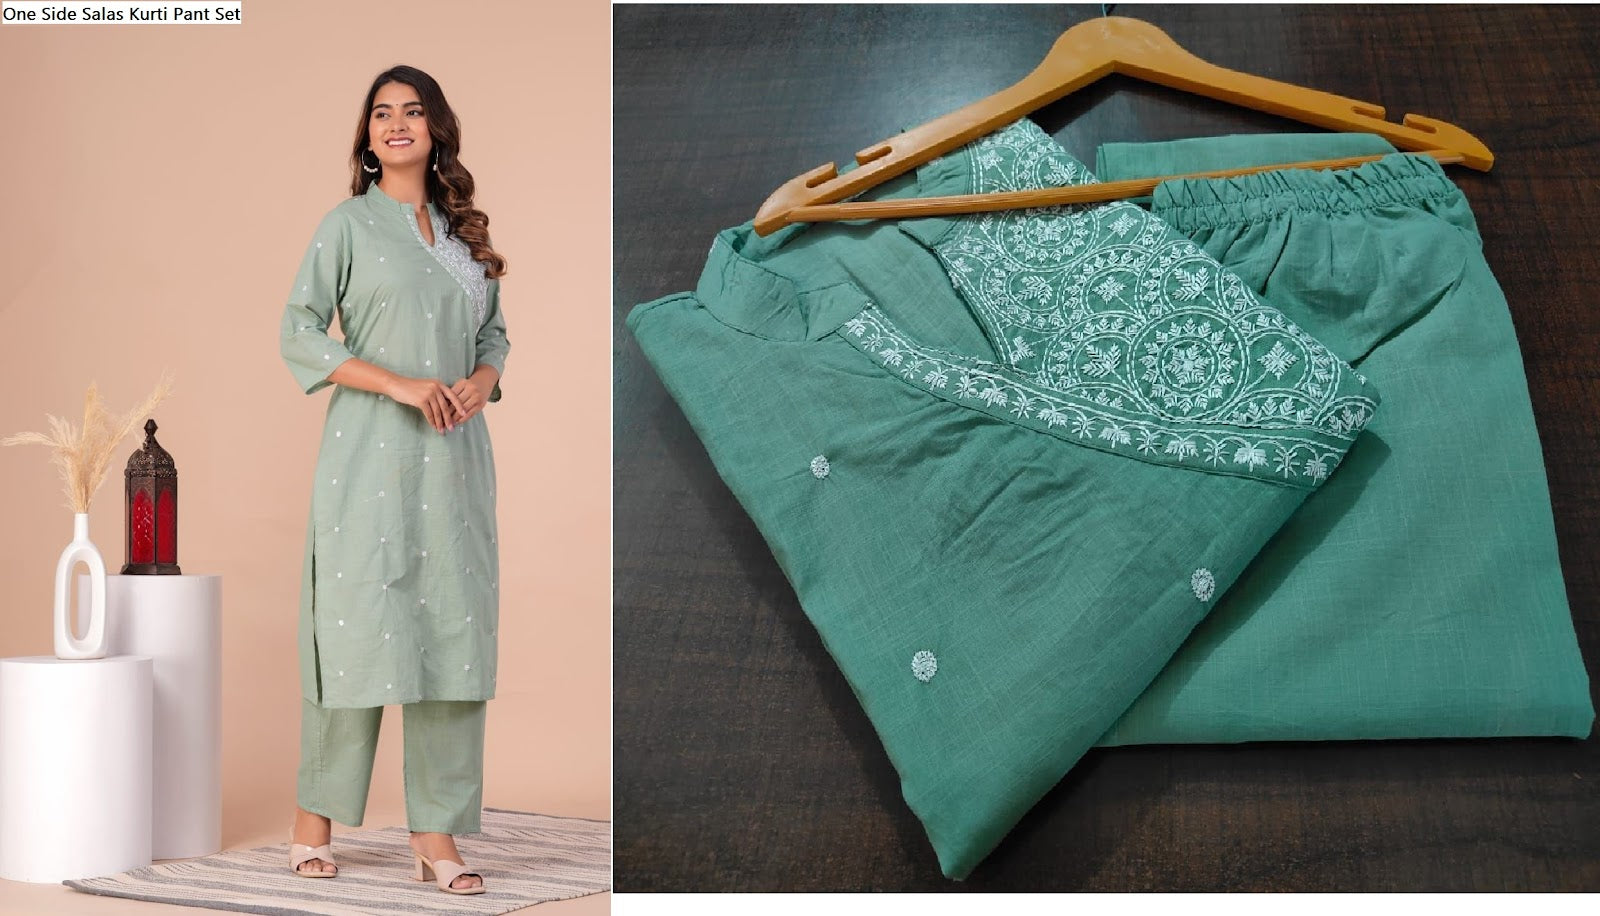 Arhams Designer Kurtis - 😍 A Line Princess cut, one side pocket, India's  top most brand approved Patern and prints 😍 As always Best Quality  Guarantee Fabric :- Cotton Flex Sizes :-